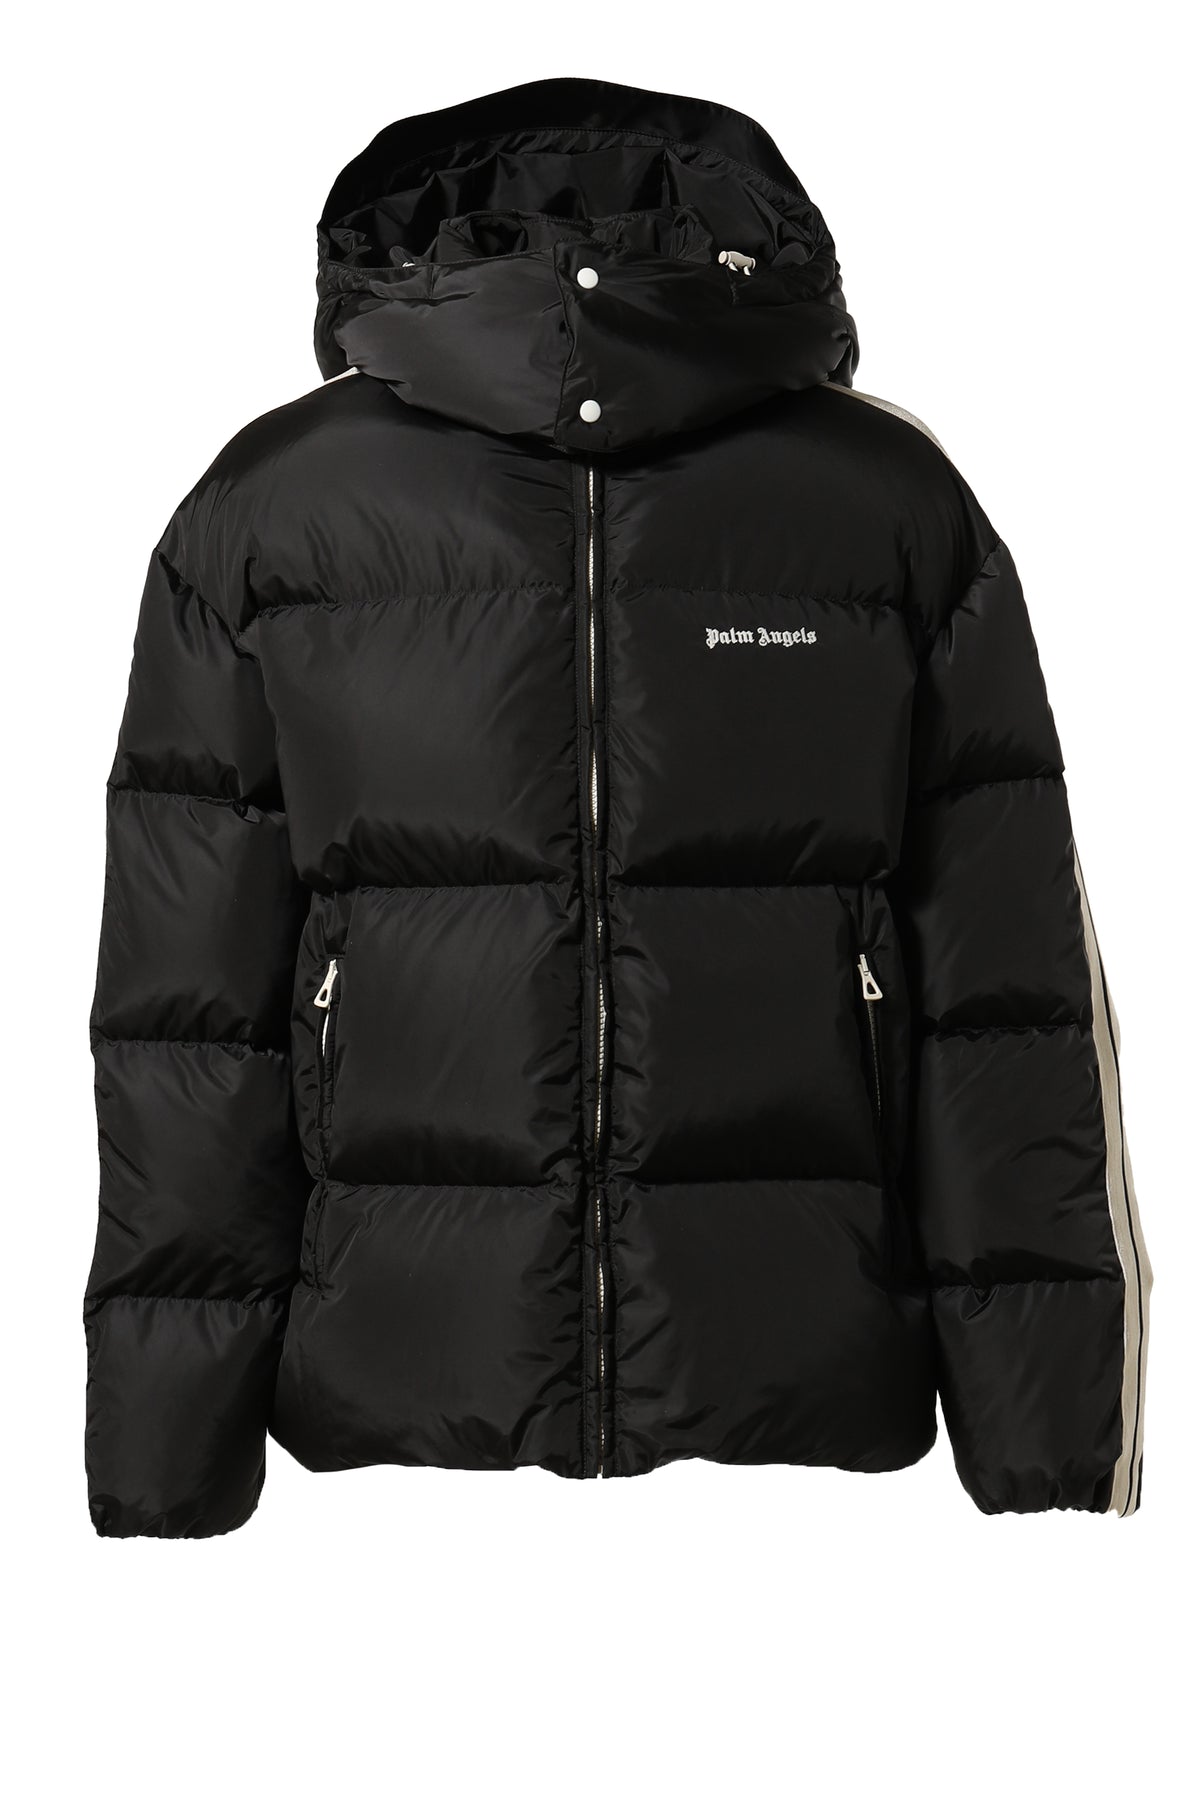 Palm Angels HOODED TRACK DOWN JKT / BLK WHT